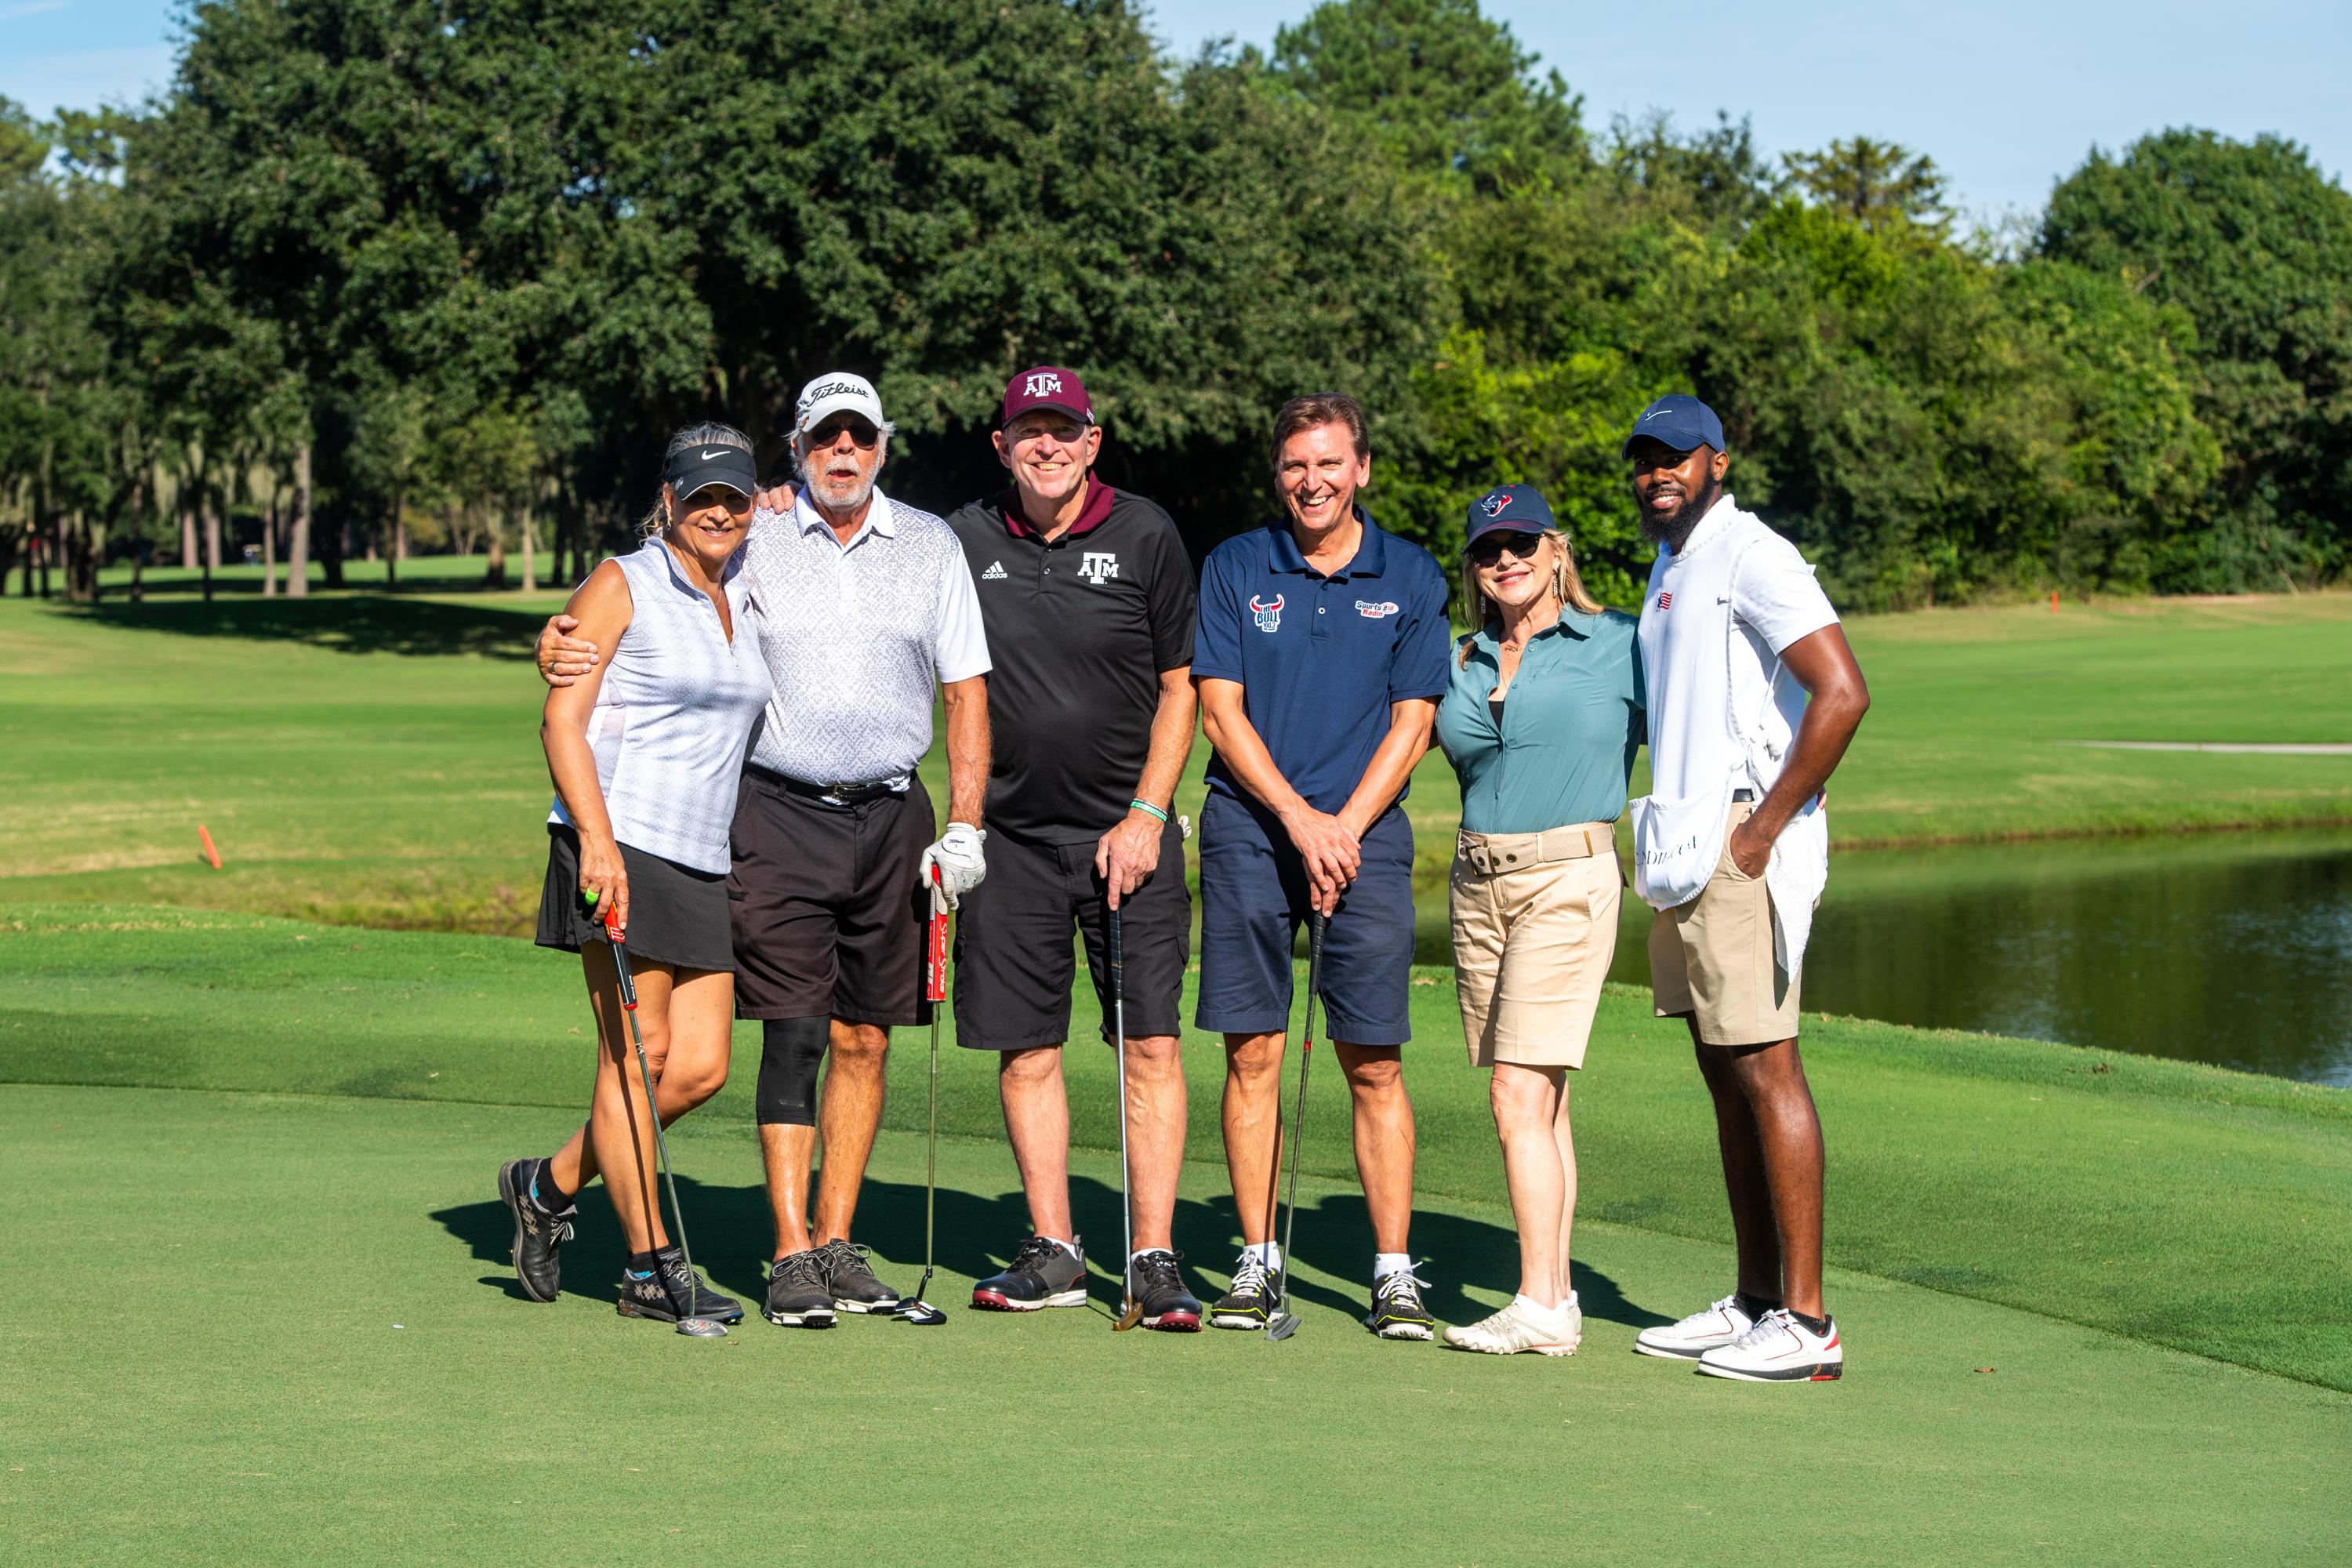 Group photo of people at the golf course